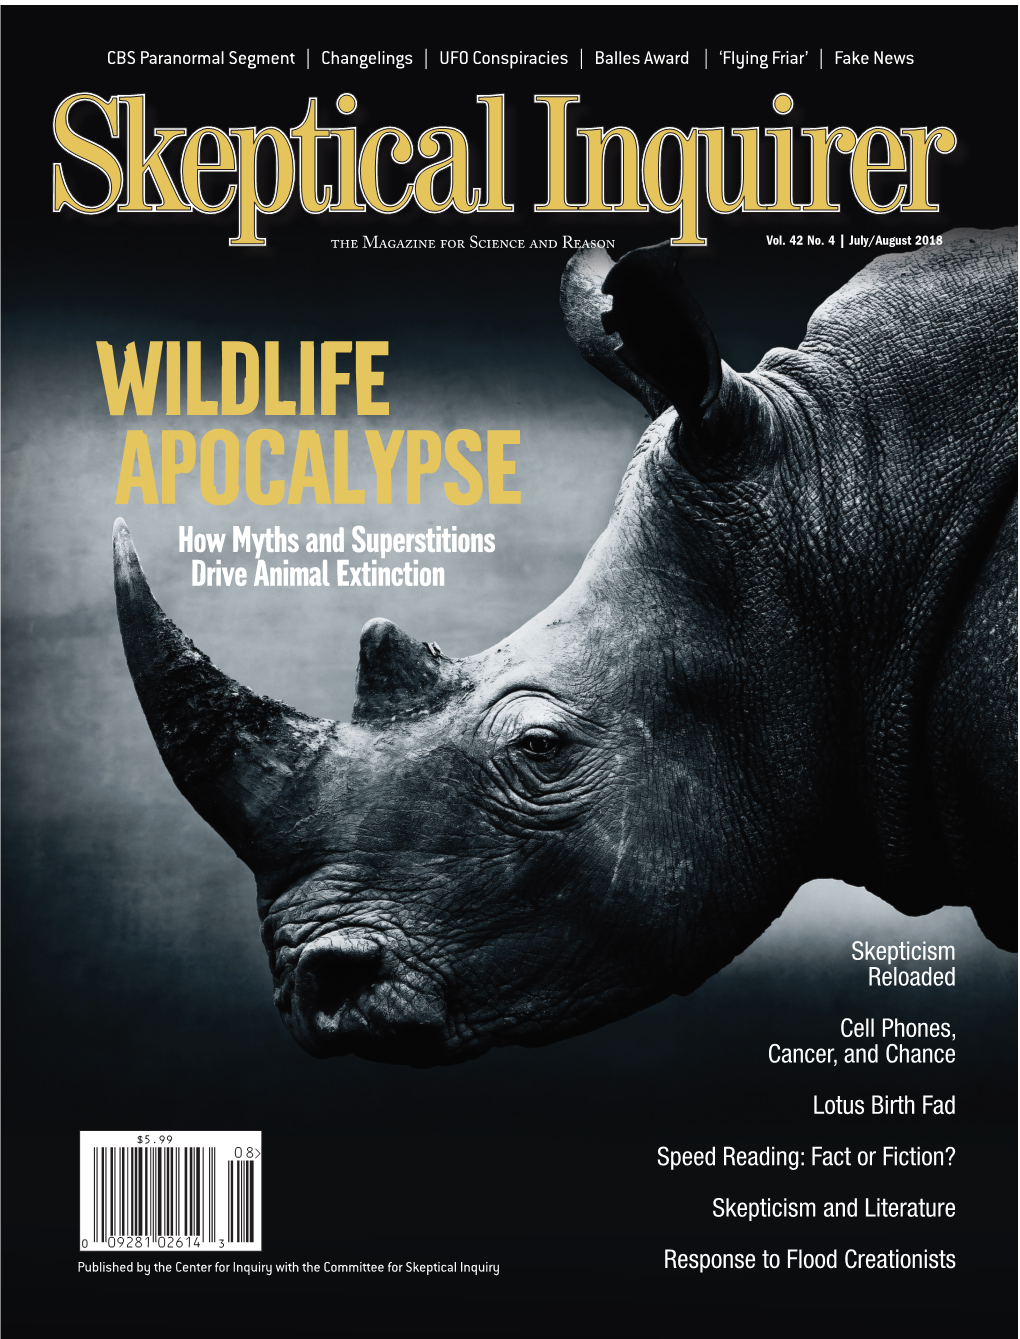 WILDLIFE APOCALYPSE How Myths and Superstitions Drive Animal Extinction